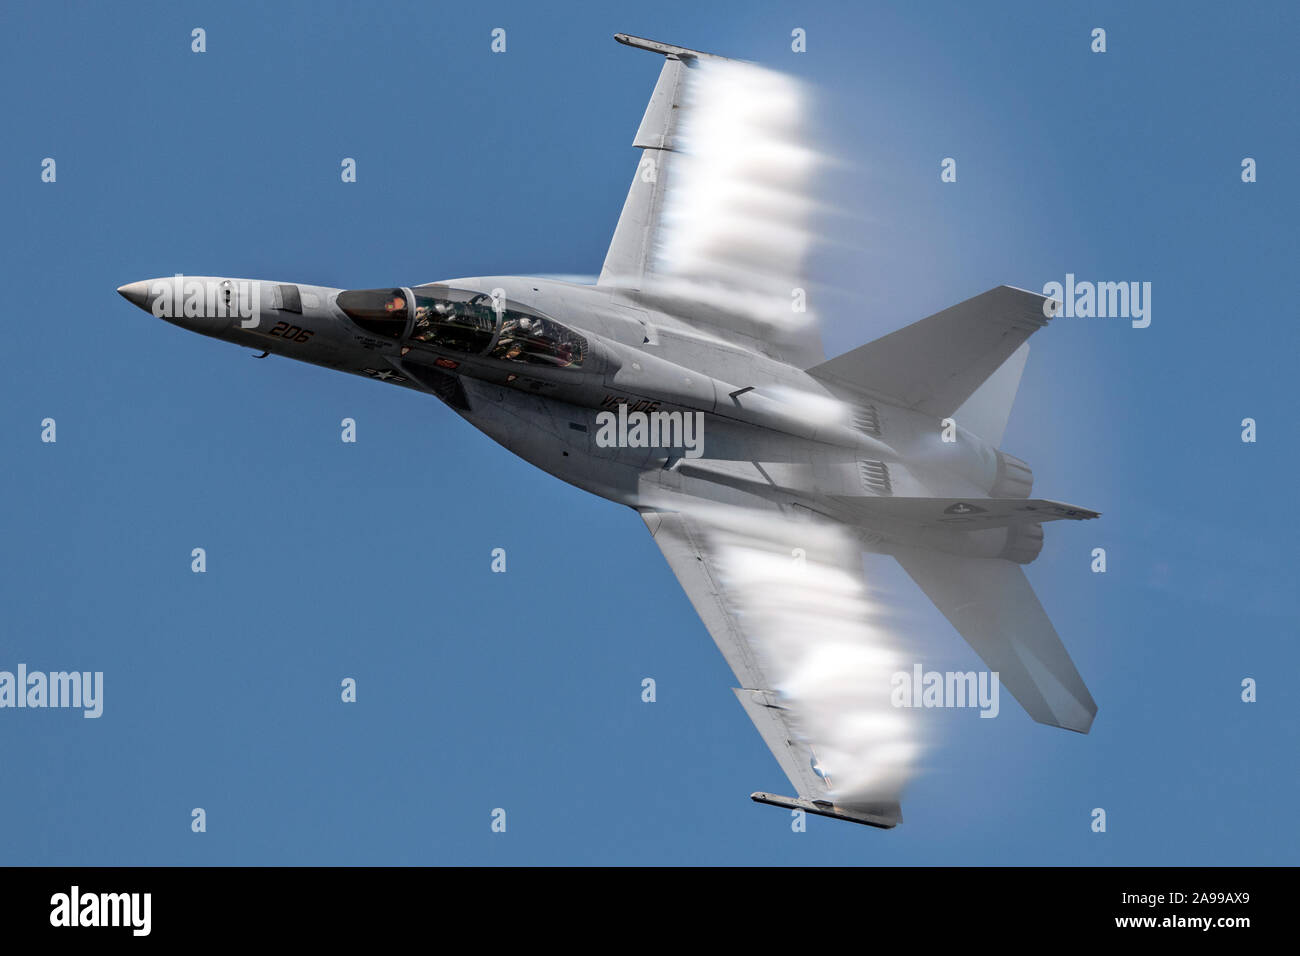 An F/A-18 Super Hornet performs a demo at the 2015 Cleveland International Airshow. Stock Photo